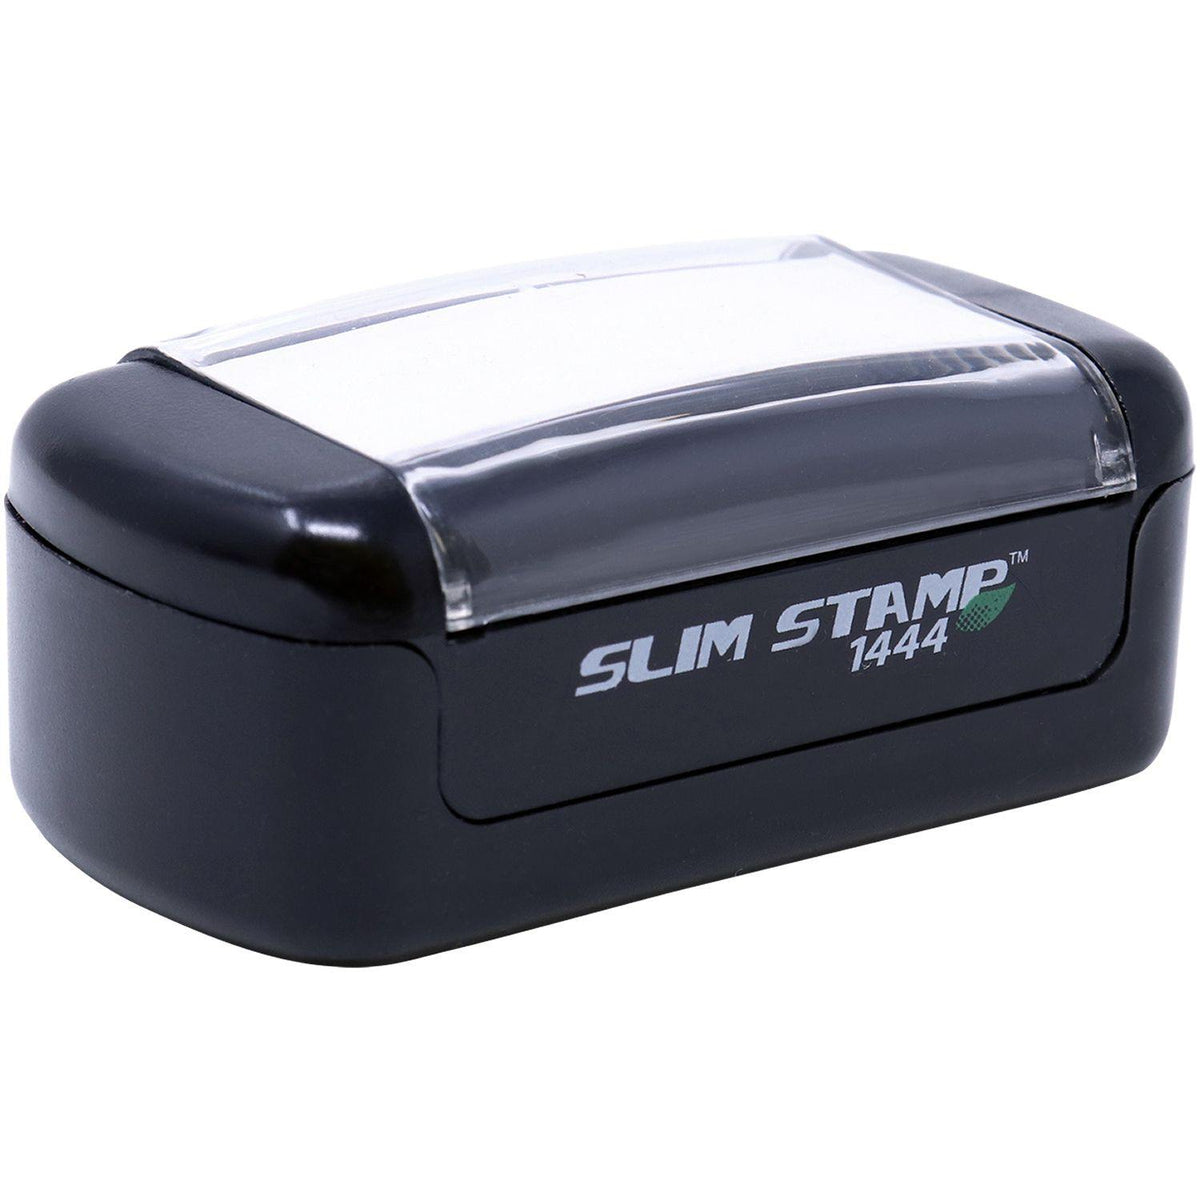 Alt View of Slim Pre-Inked Copia Stamp Mount Angle